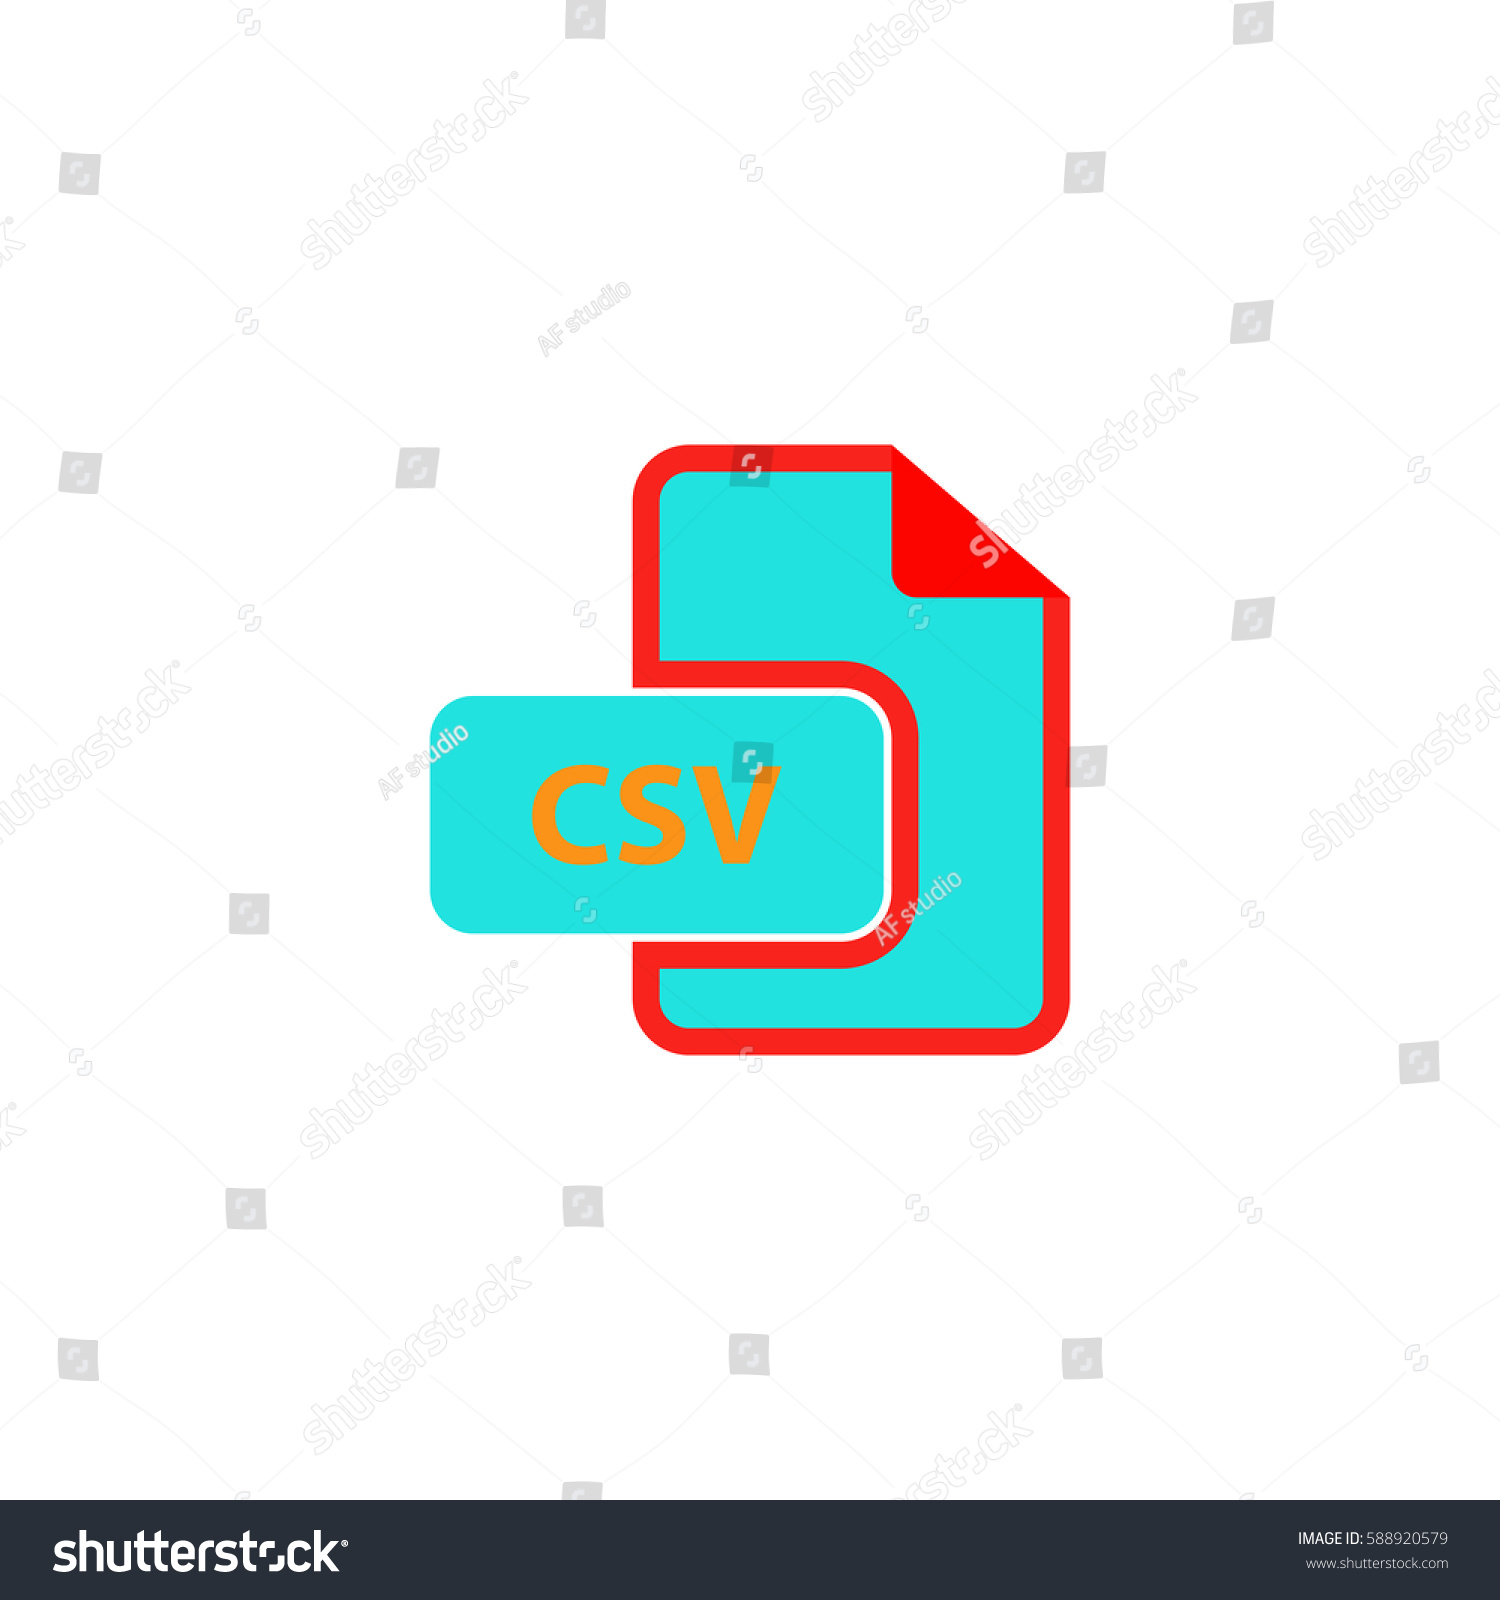 Csv Extension Text File Type Color Symbol Icon Royalty Free Stock Vector 588920579 2104